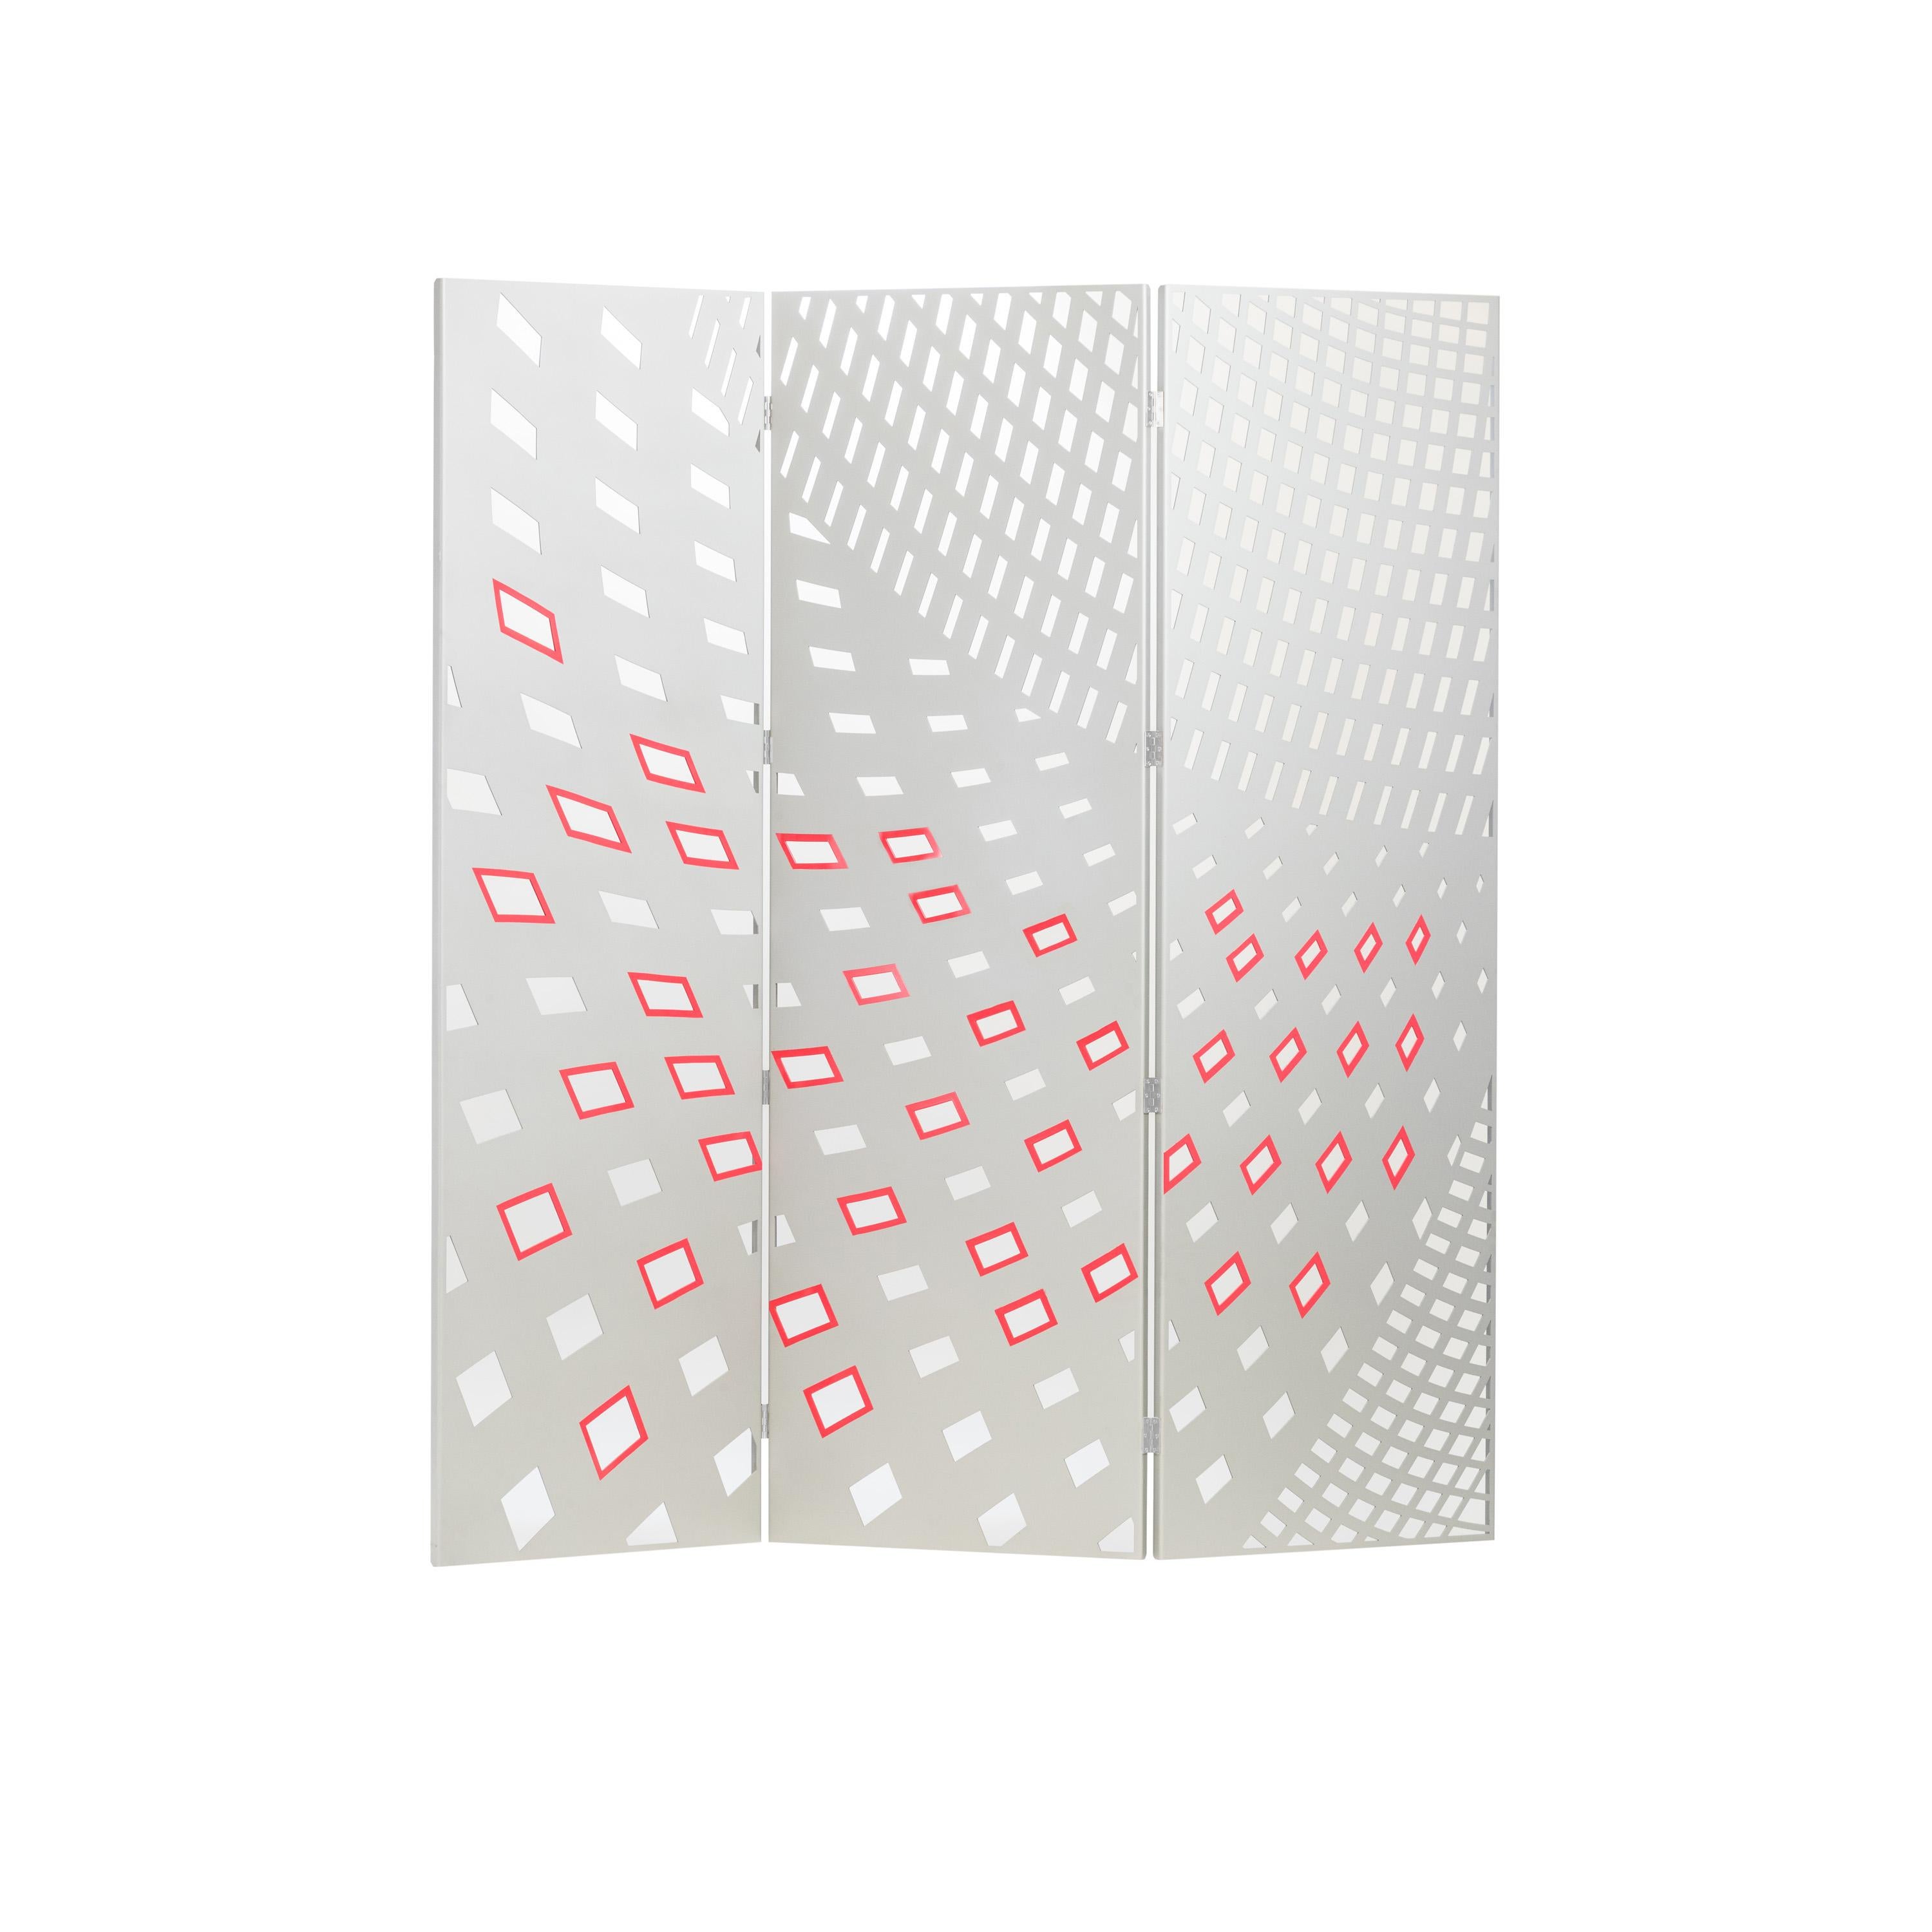 Evolution, change, dynamism: Otto divider is the expression of freedom of movement. It is a perforated canvas with an irregular pattern, always different: a kinetic sculpture. Otto is an observation point that gives rhythm to the space with shapes